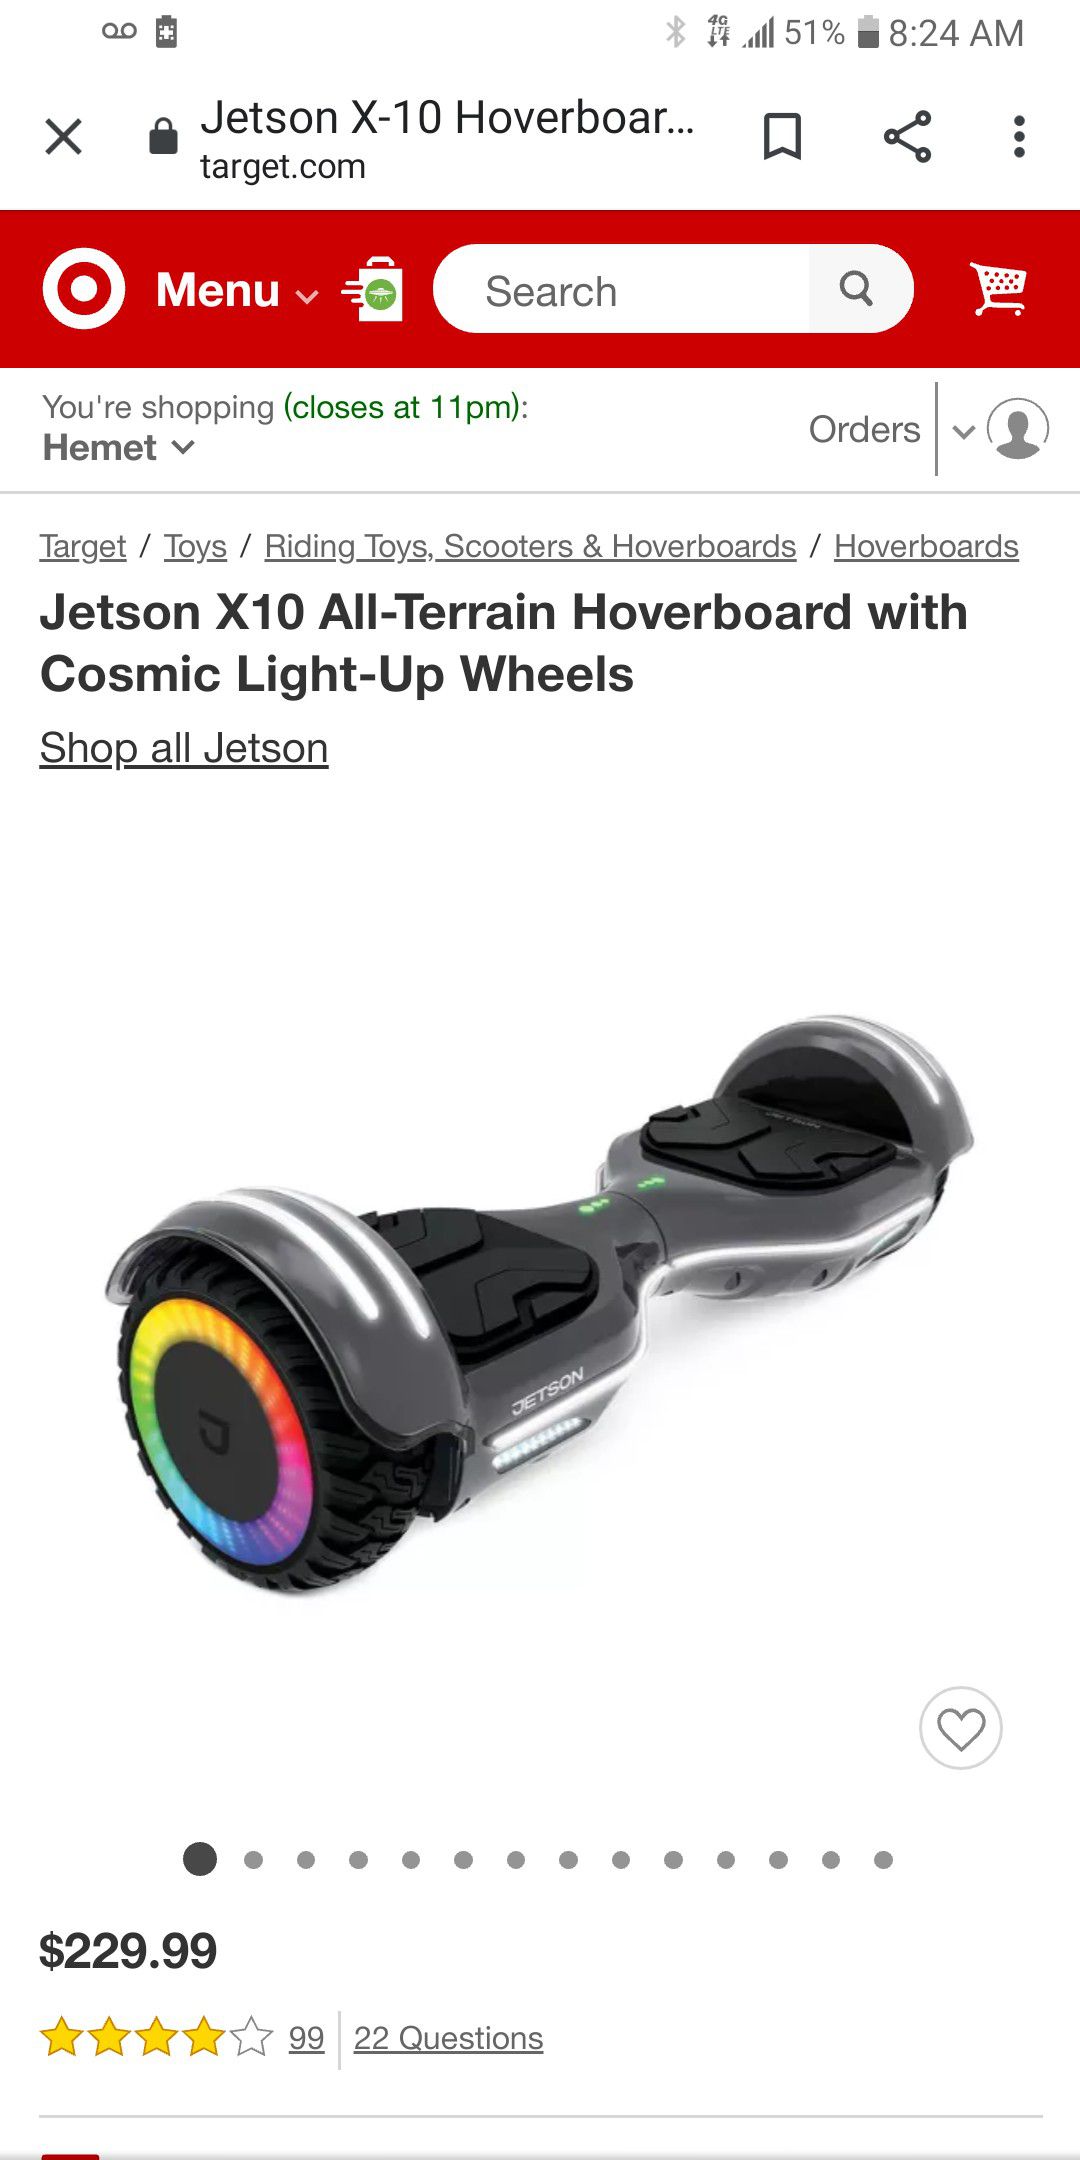 Brand new in box Bluetooth hoverboard in store cost 229$